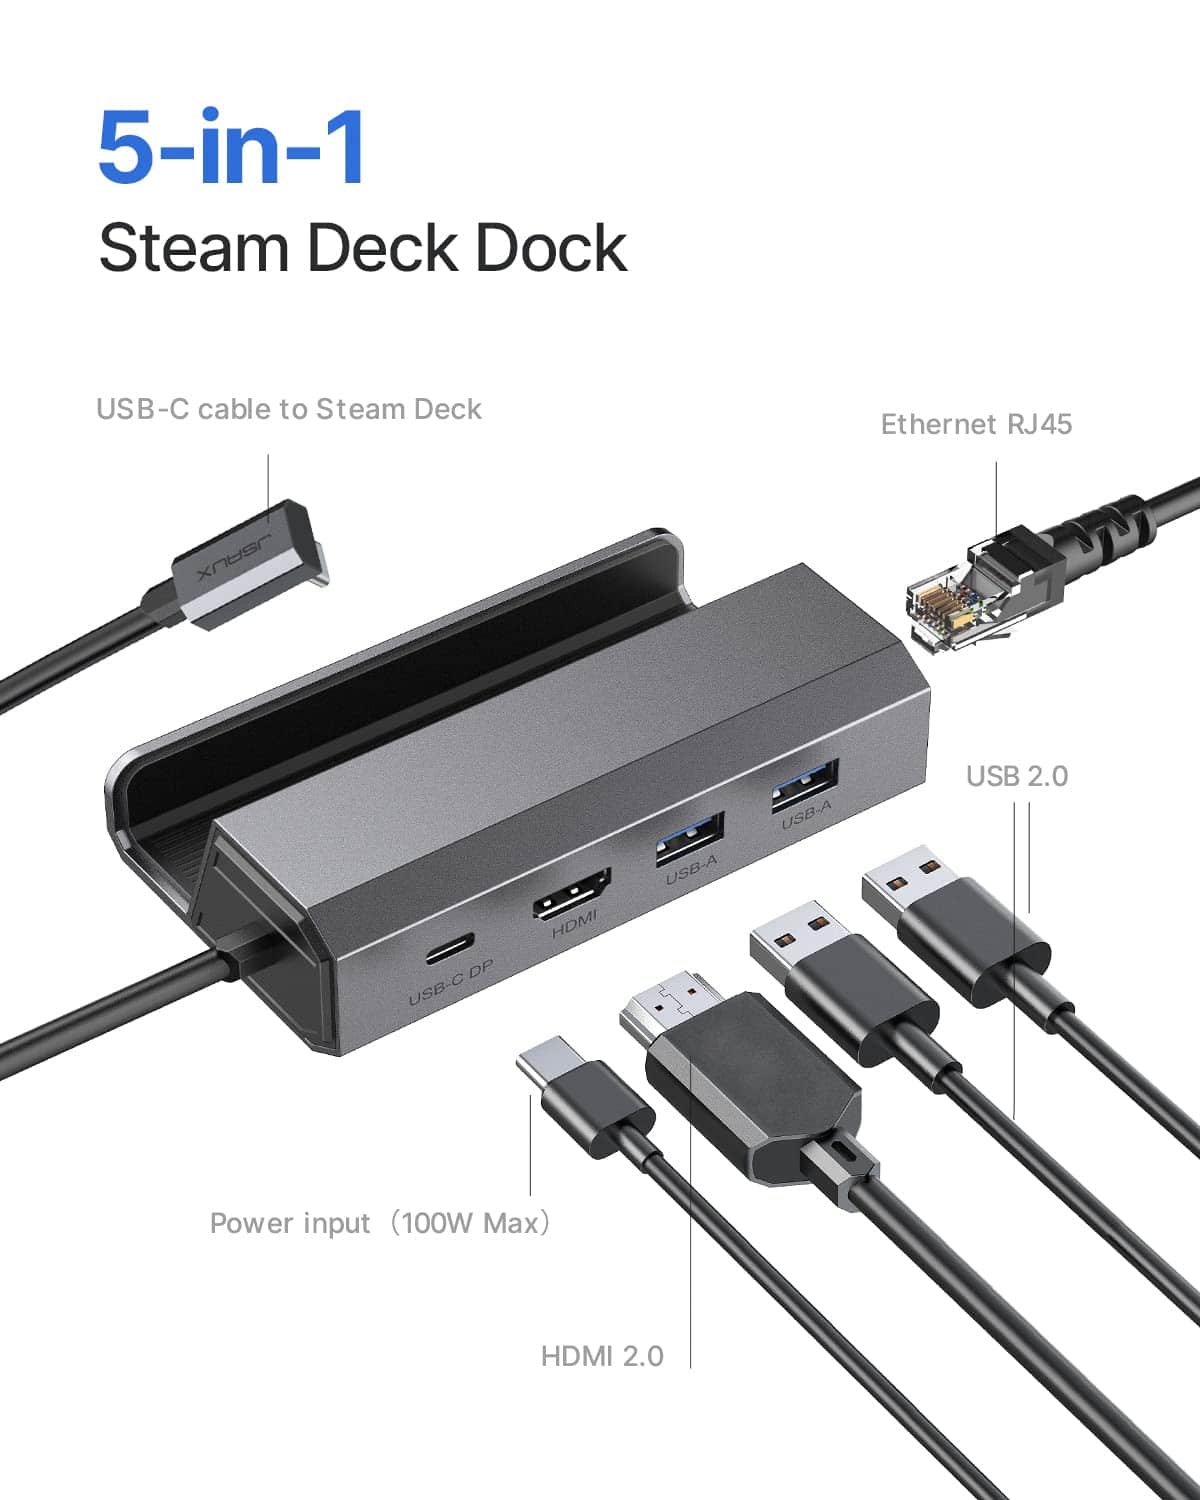 JSAUX Steam Deck dock not charging: How to fix it?